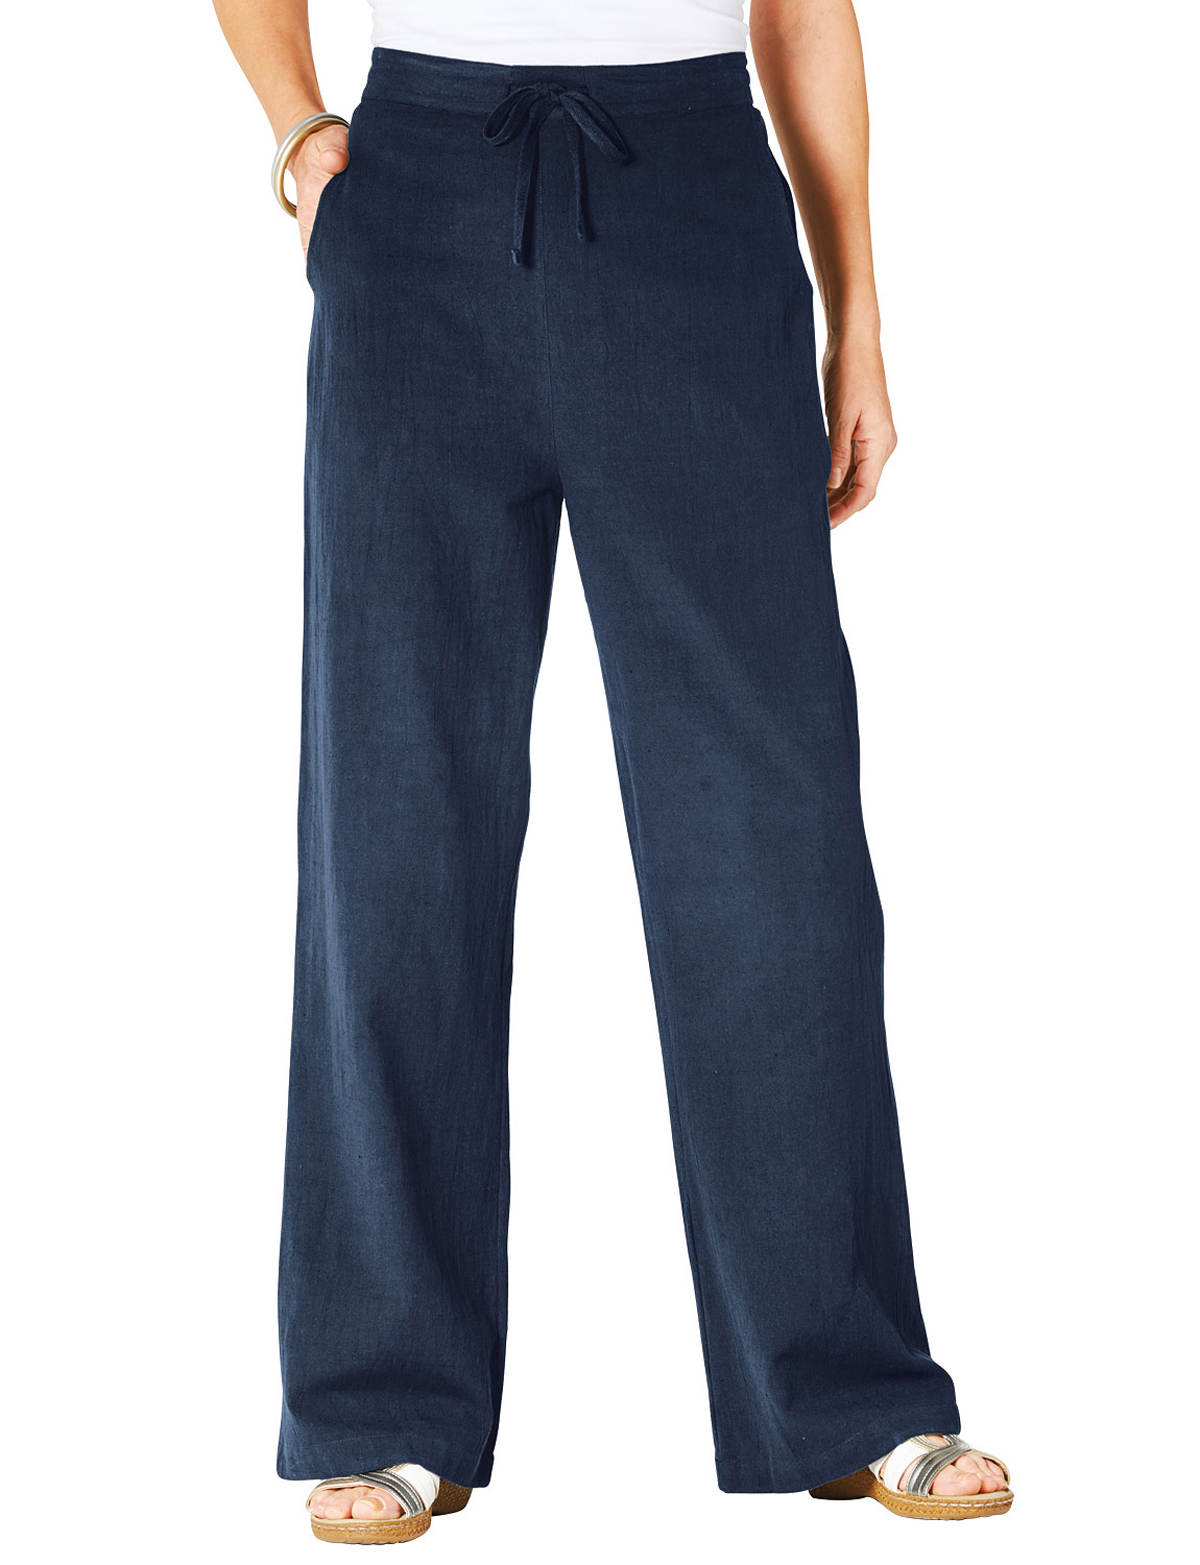 Amber - - Amber NAVY Linen Blend Trousers - Plus Size 18 to 22